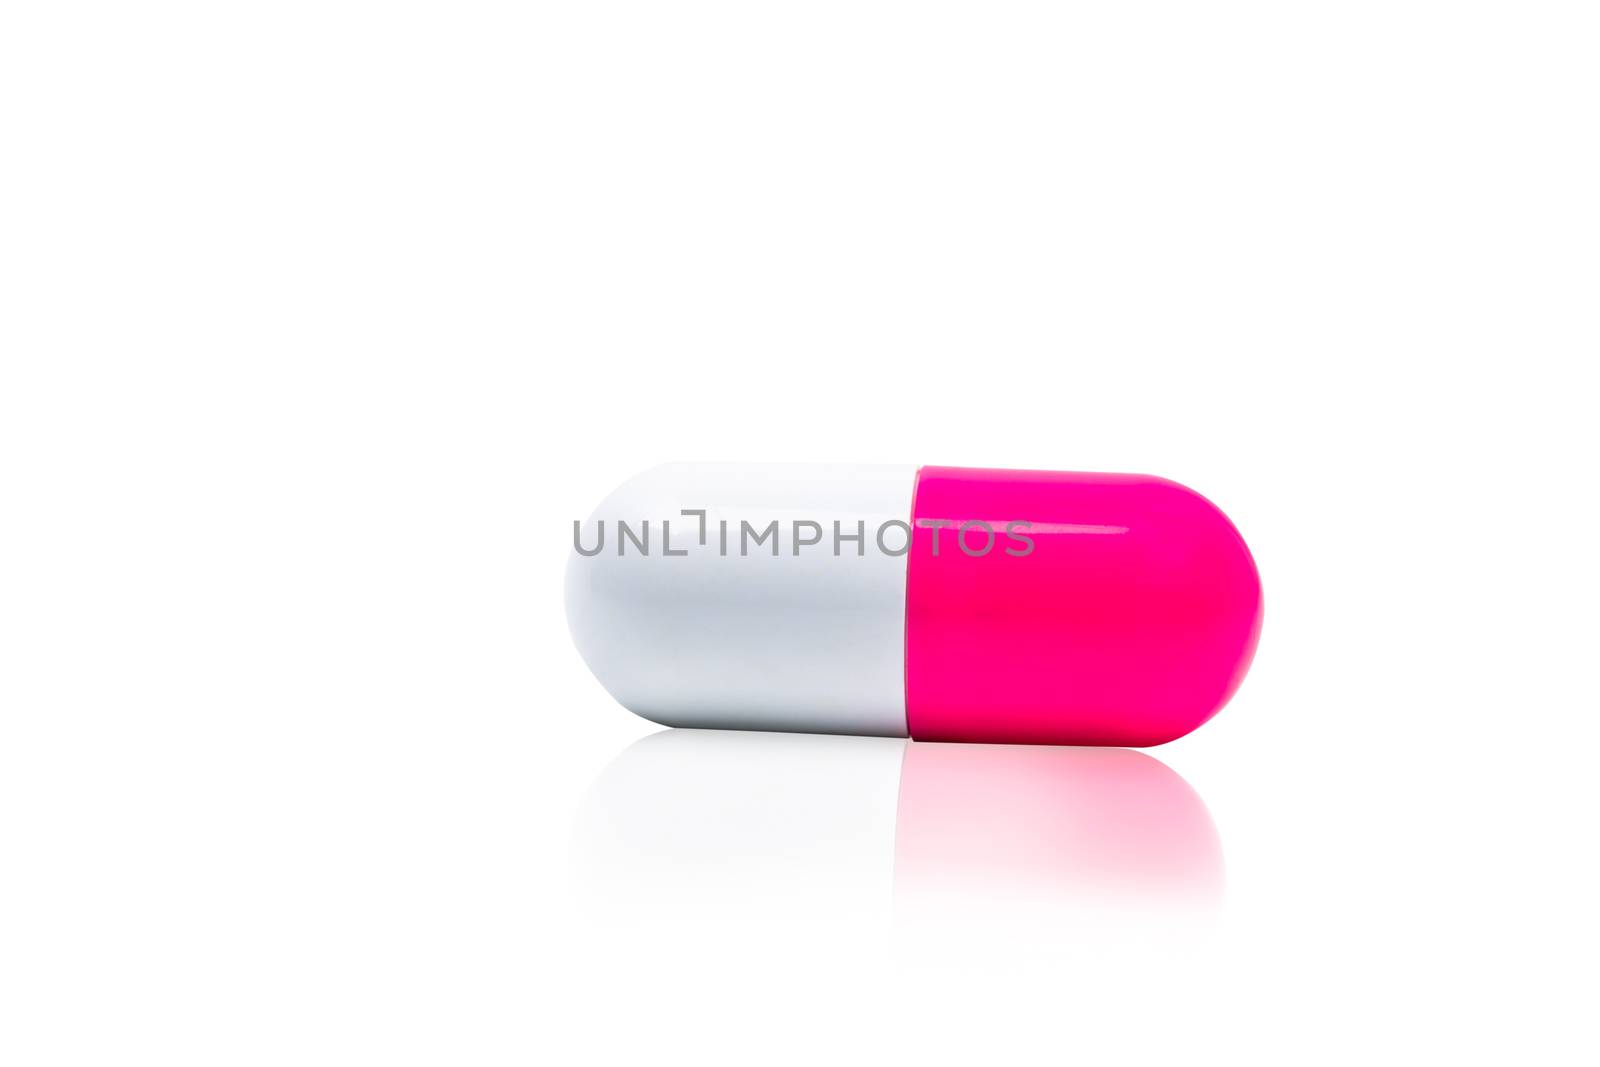 Pink, white capsule pills isolated on white background with shadow and copy space for text. Drug resistance concept. Antibiotics drug use with reasonable and global healthcare concept. Pharmacy sign and symbol. Pharmaceutical industry. Pharmacy background. Antibiotic or antimicrobial drug resistance. Health budgets and policy.